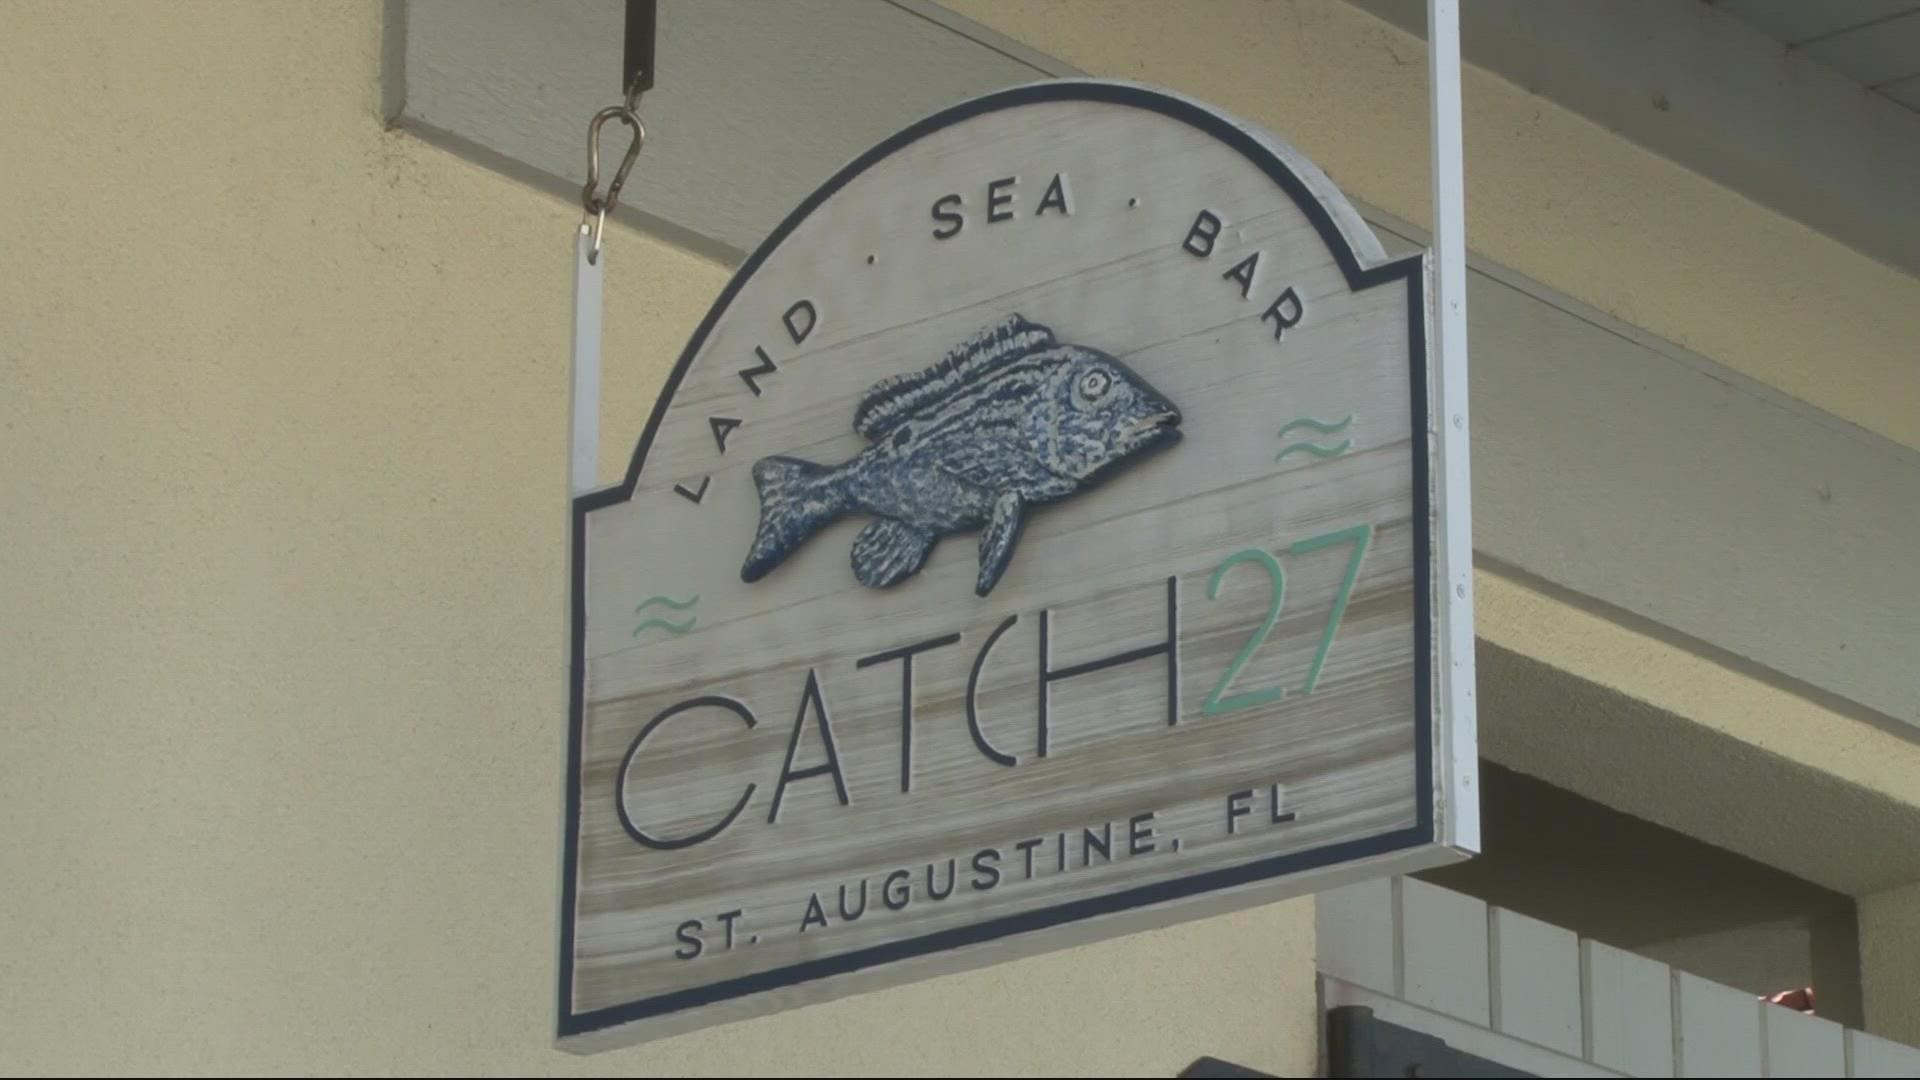 In an effort to help its staff as well as customers recover from Ian, Catch 27 opened its doors to customers shortly after Hurricane Ian caused damage.